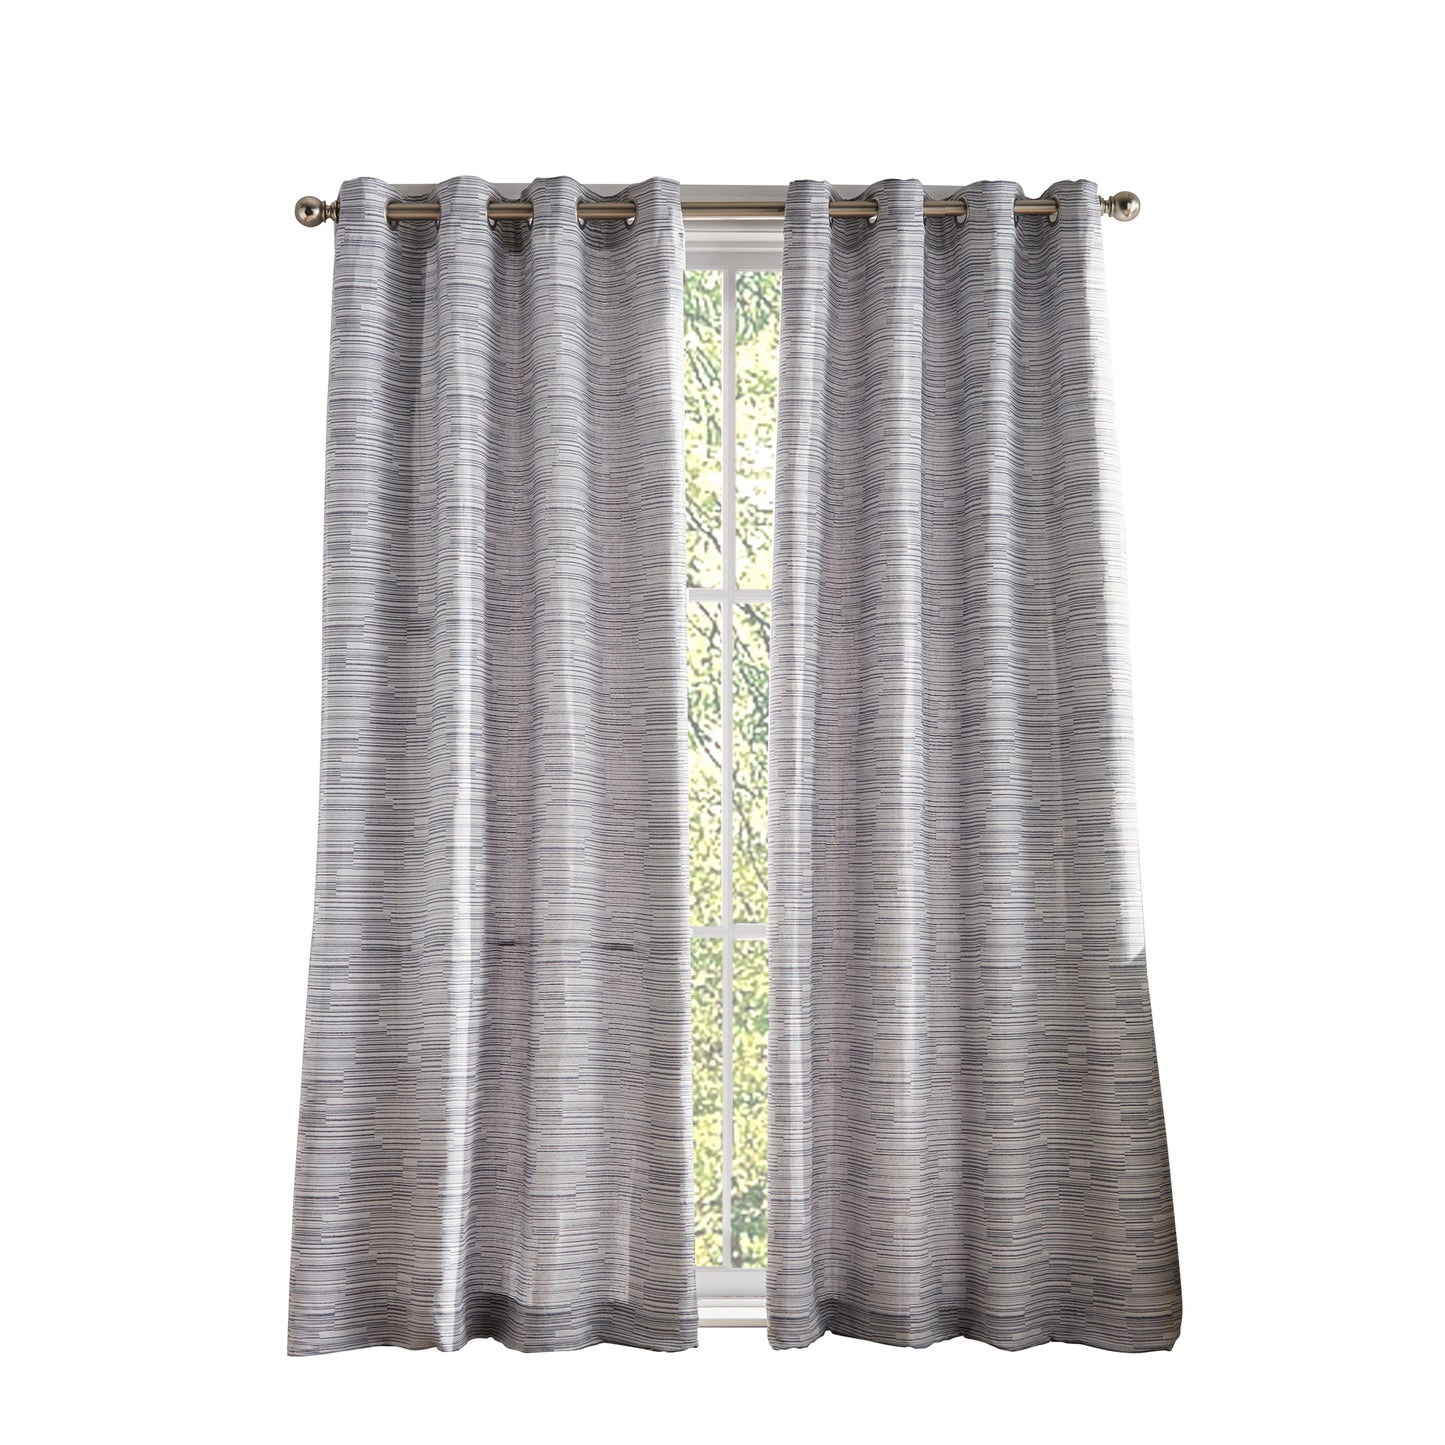 Tommy Hilfiger Offset Grid Curtain Panel Pair